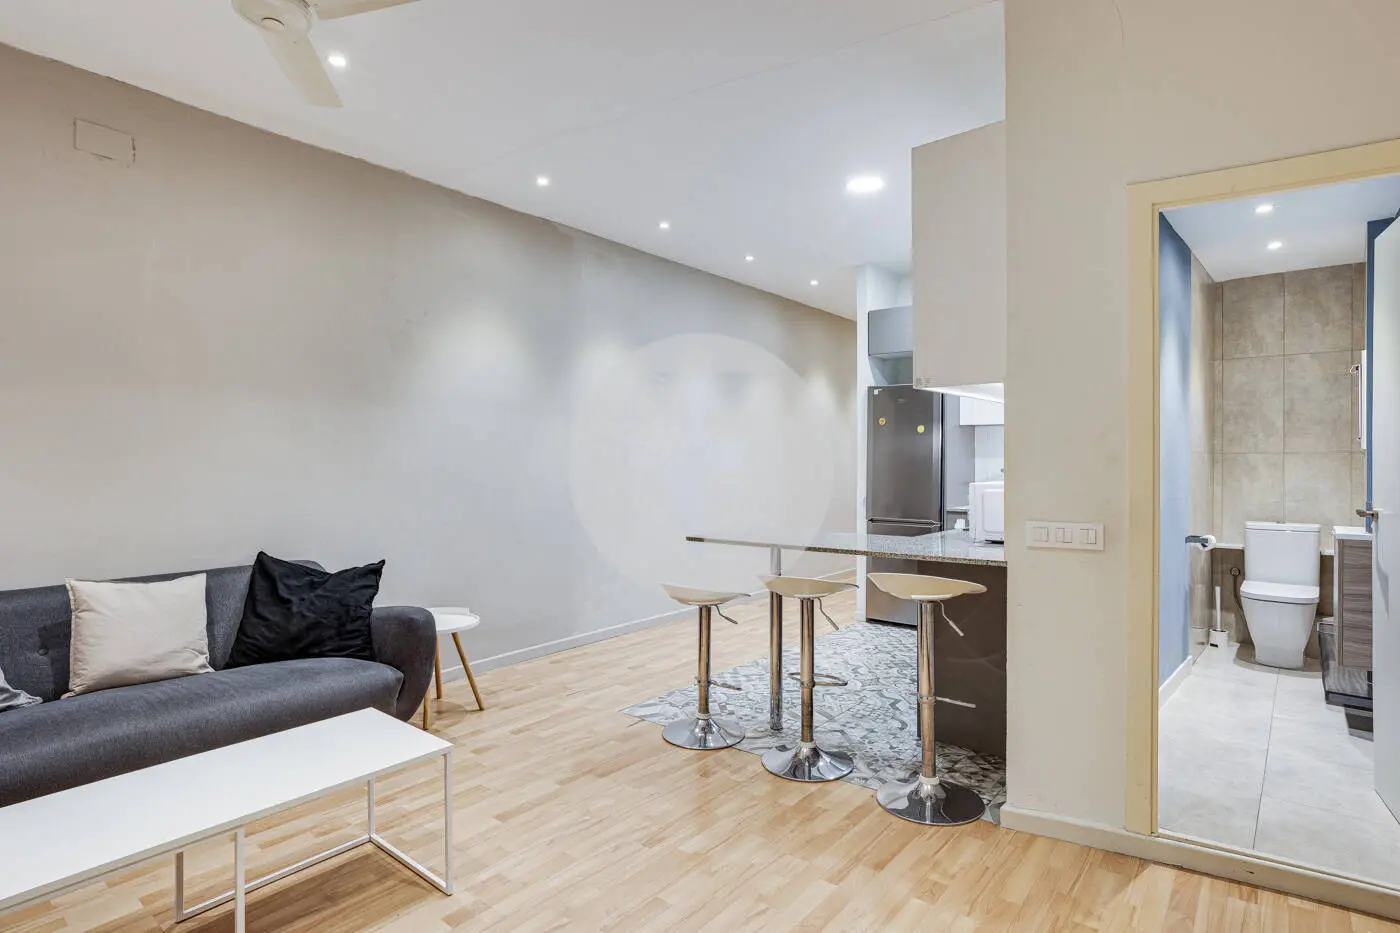 Magnificent apartment for sale next to Pl Universitat of 114m2 according to the land registry, located on Tallers Street in the Ciutat Vella neighborhood of Barcelona 6